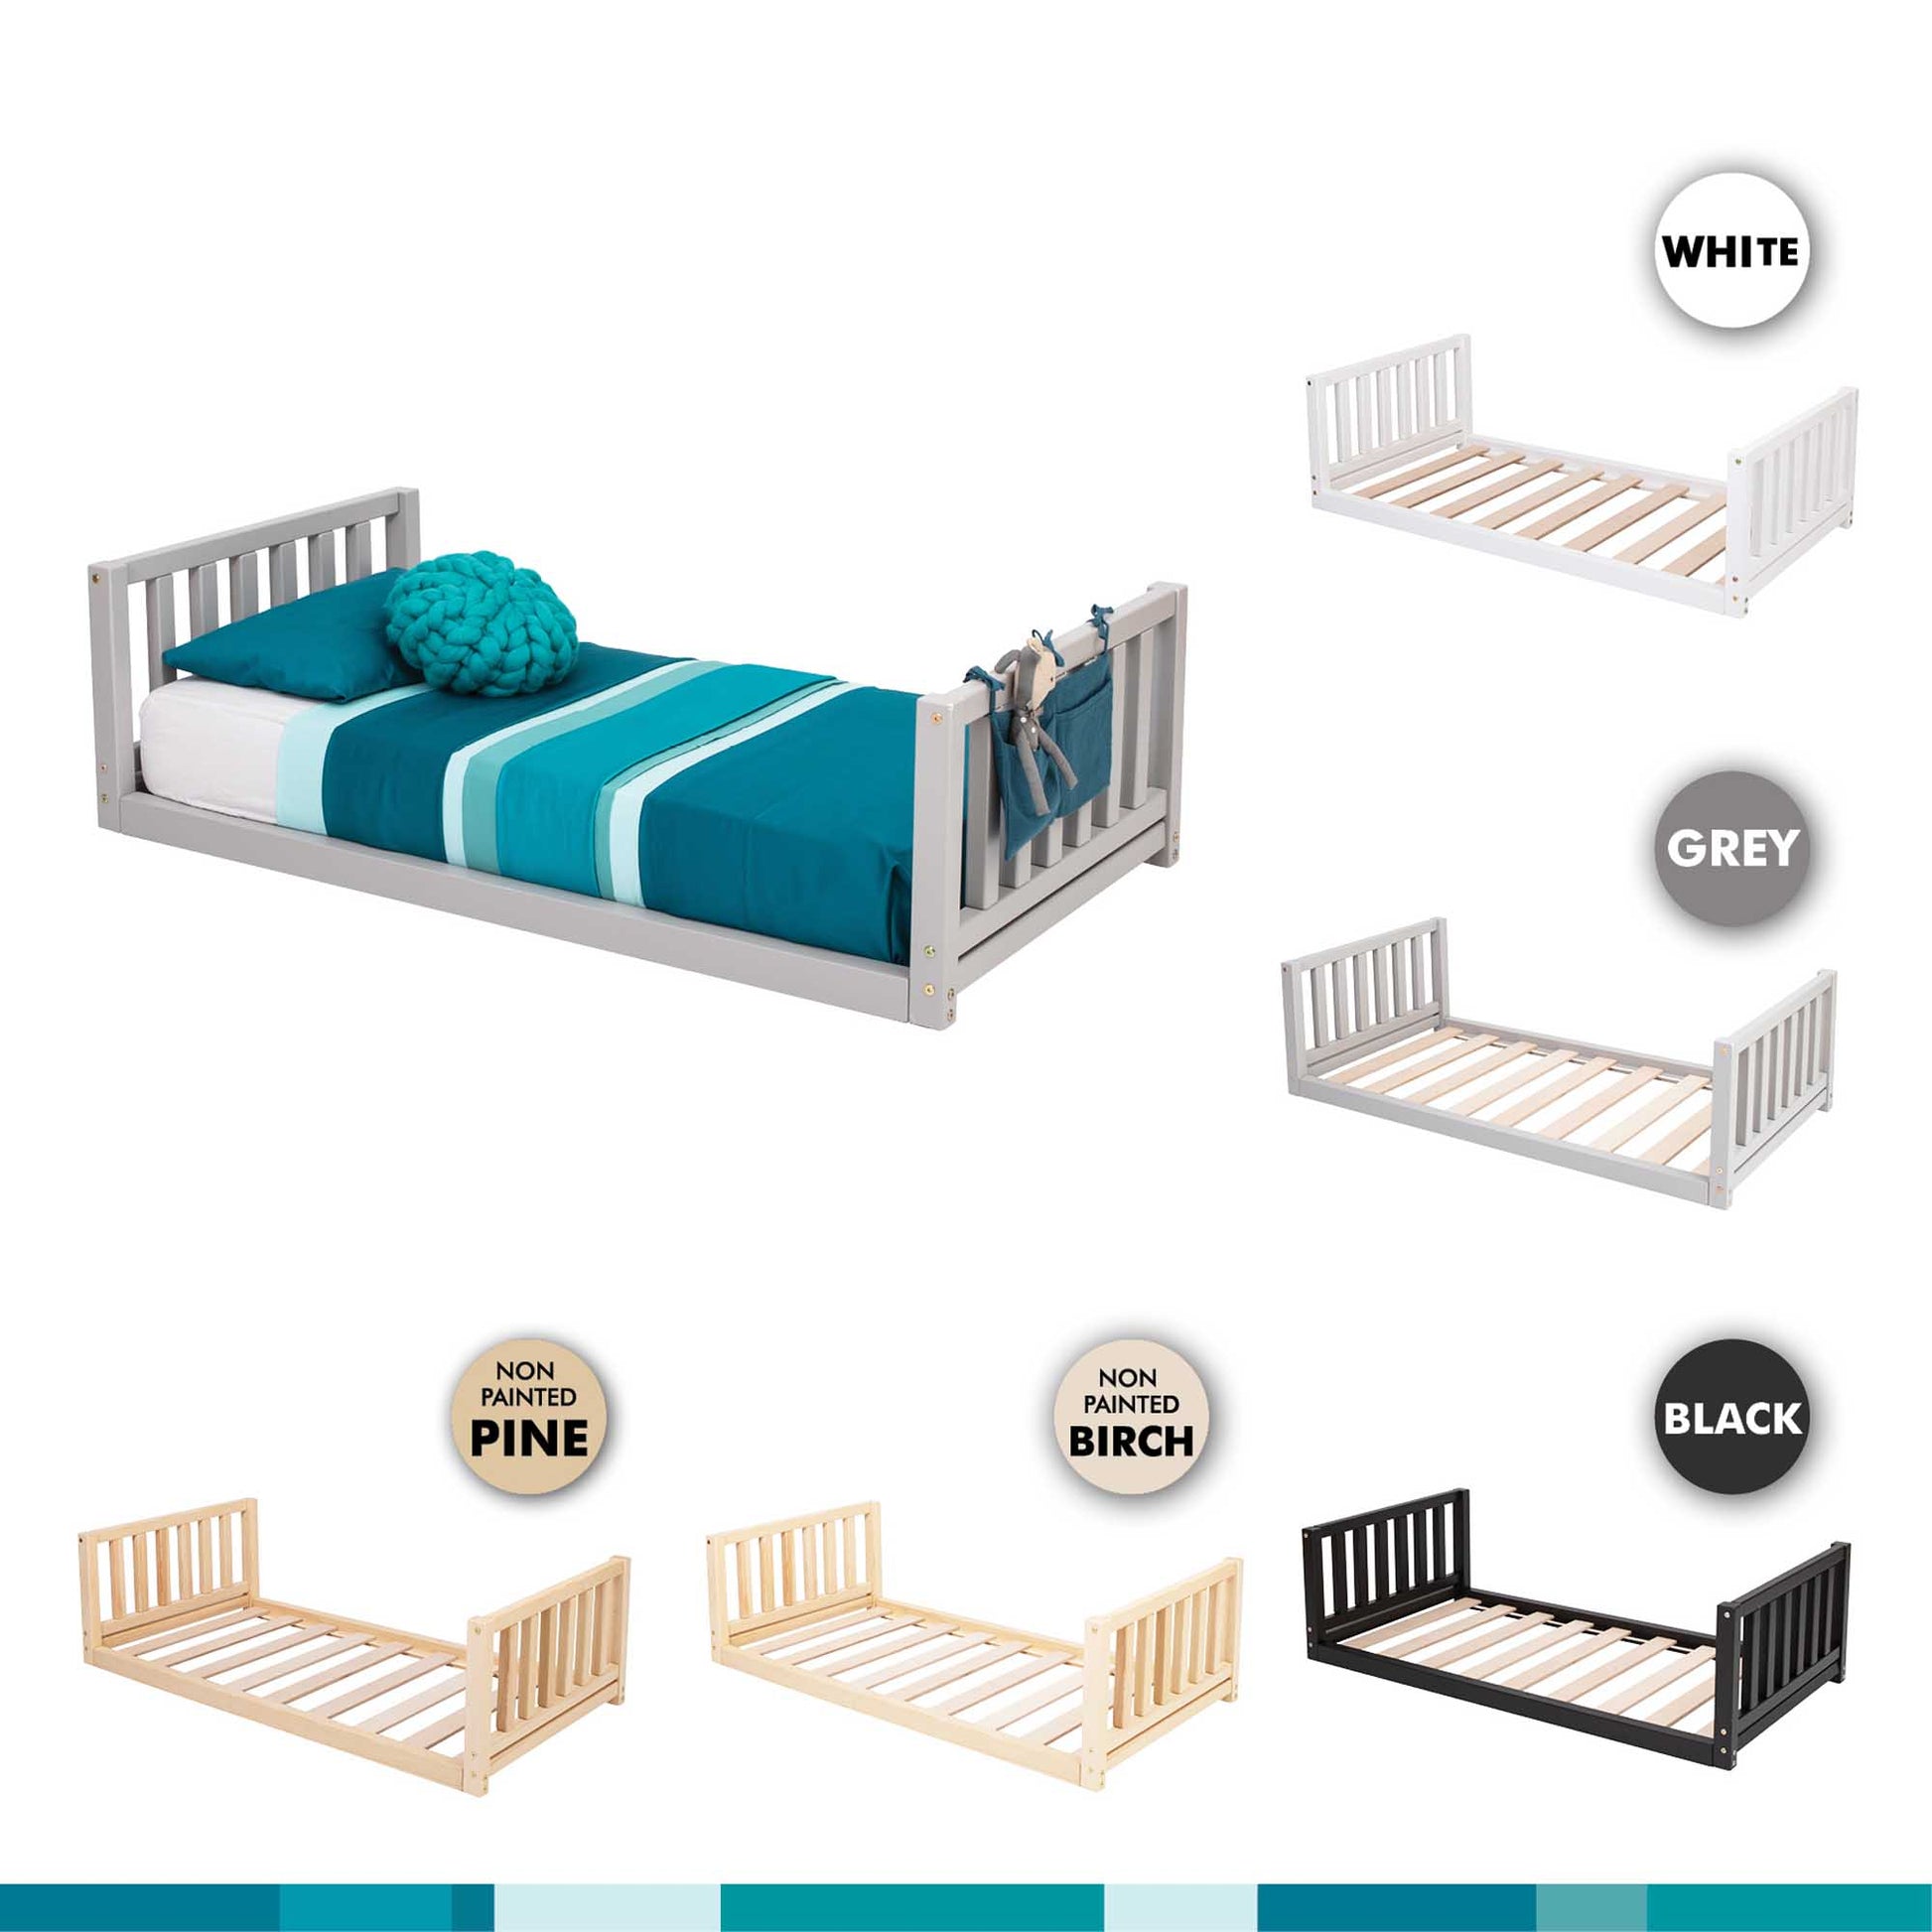 A Kids' bed with a headboard and footboard with different colors and styles of slats.